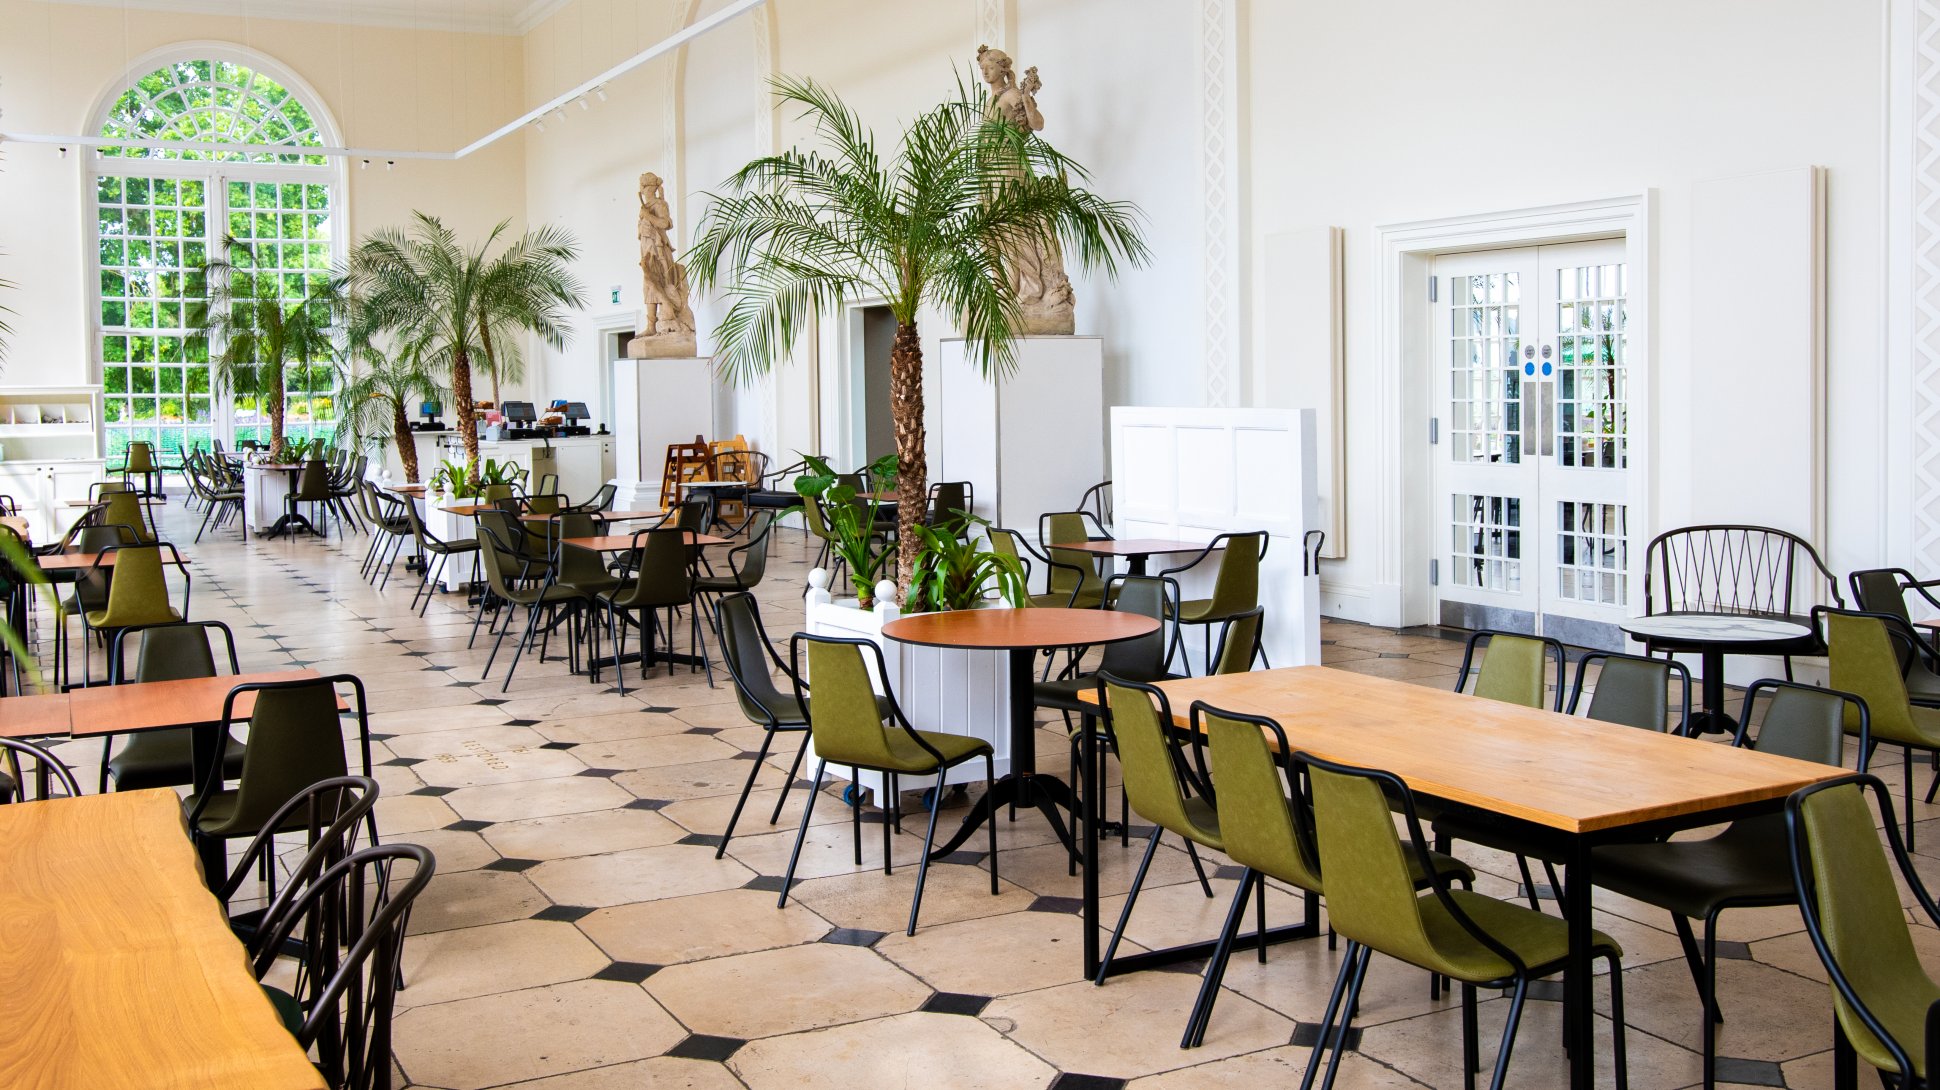 The inside of the Orangery cafe at Kew Gardens